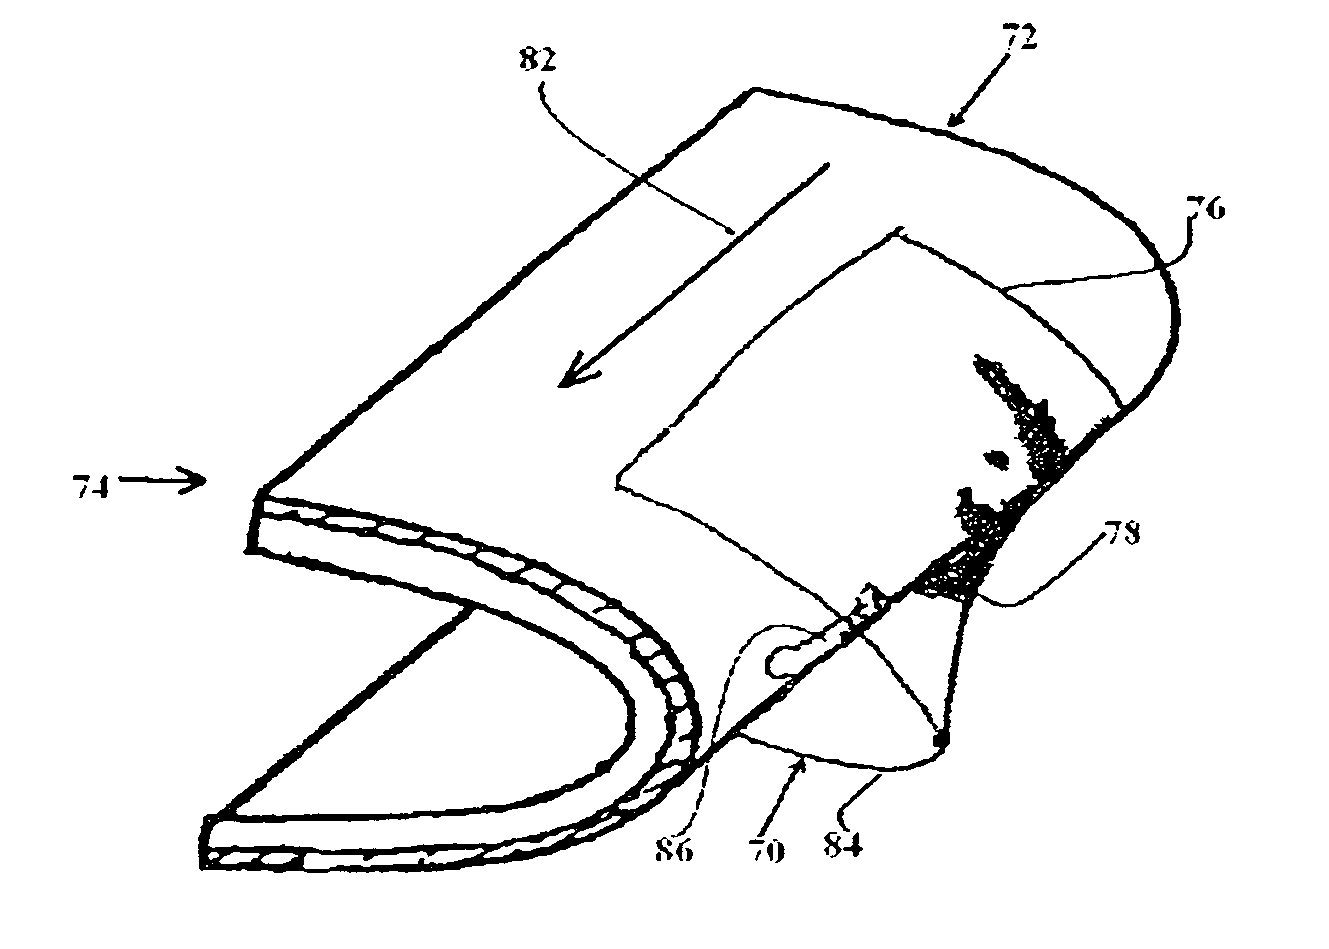 Method of repairing an airfoil surface